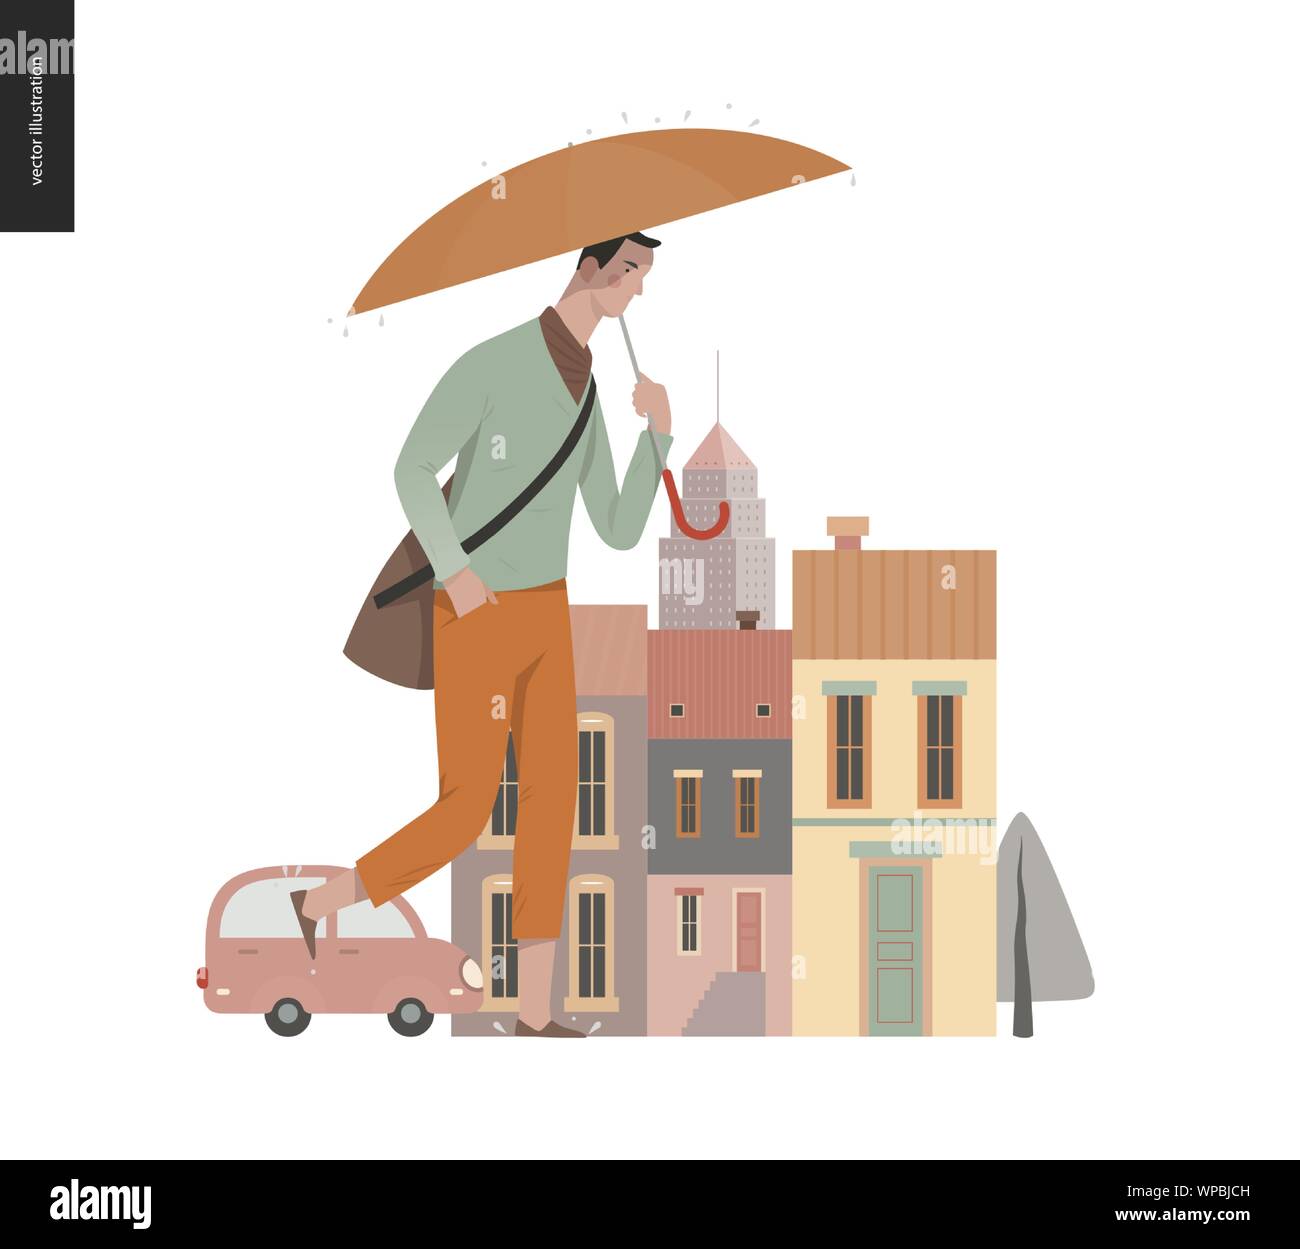 Rain - walking young man -modern flat vector concept illustration of a young man holding an umbrella, walking under the rain in the street, in front o Stock Vector